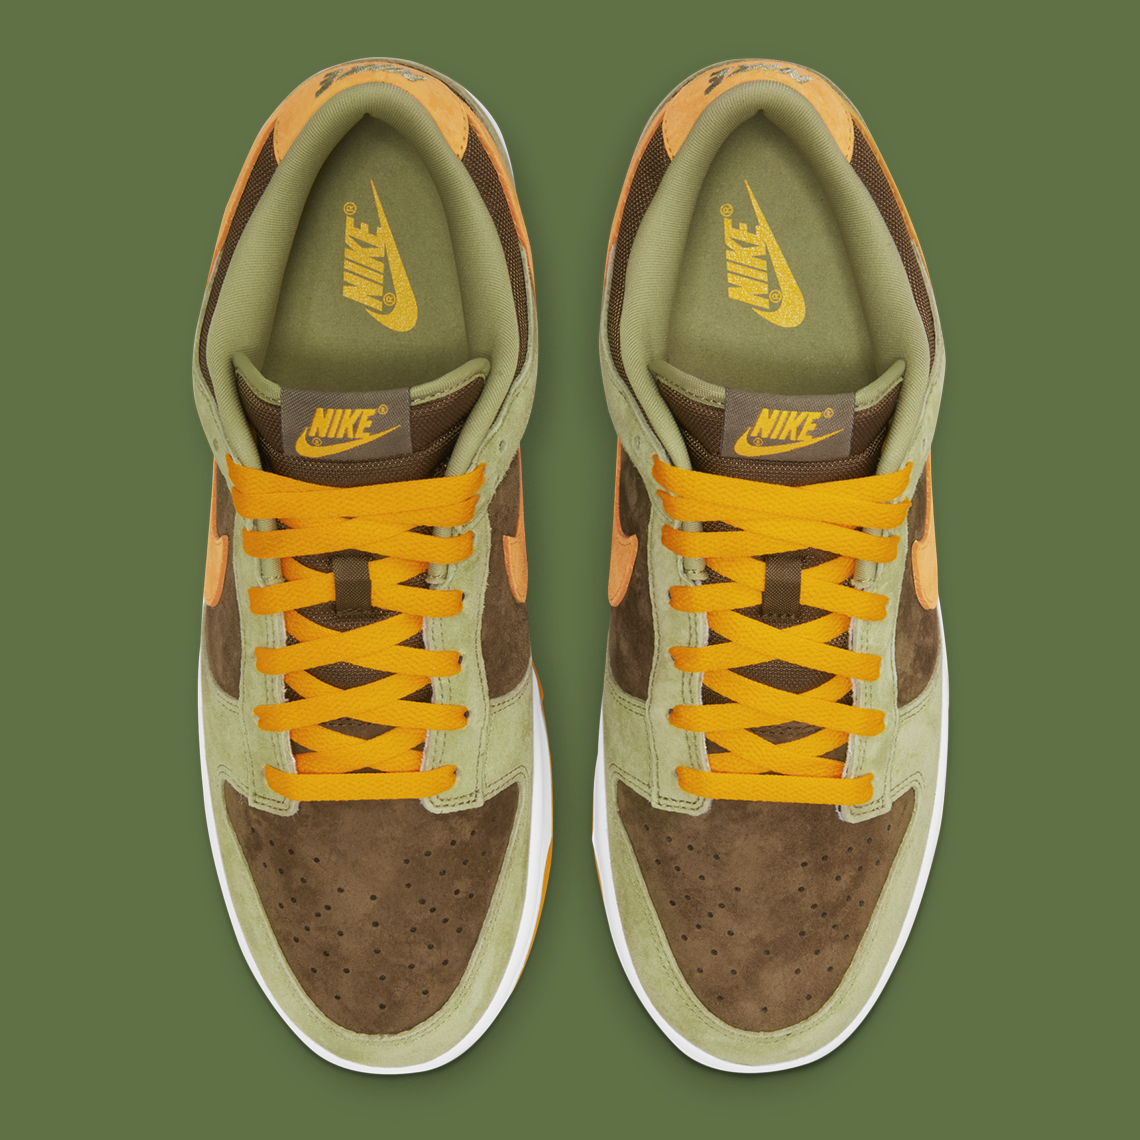 Nike Dunk Low Dusty Olive Gold DH5360-300 | SneakerNews.com